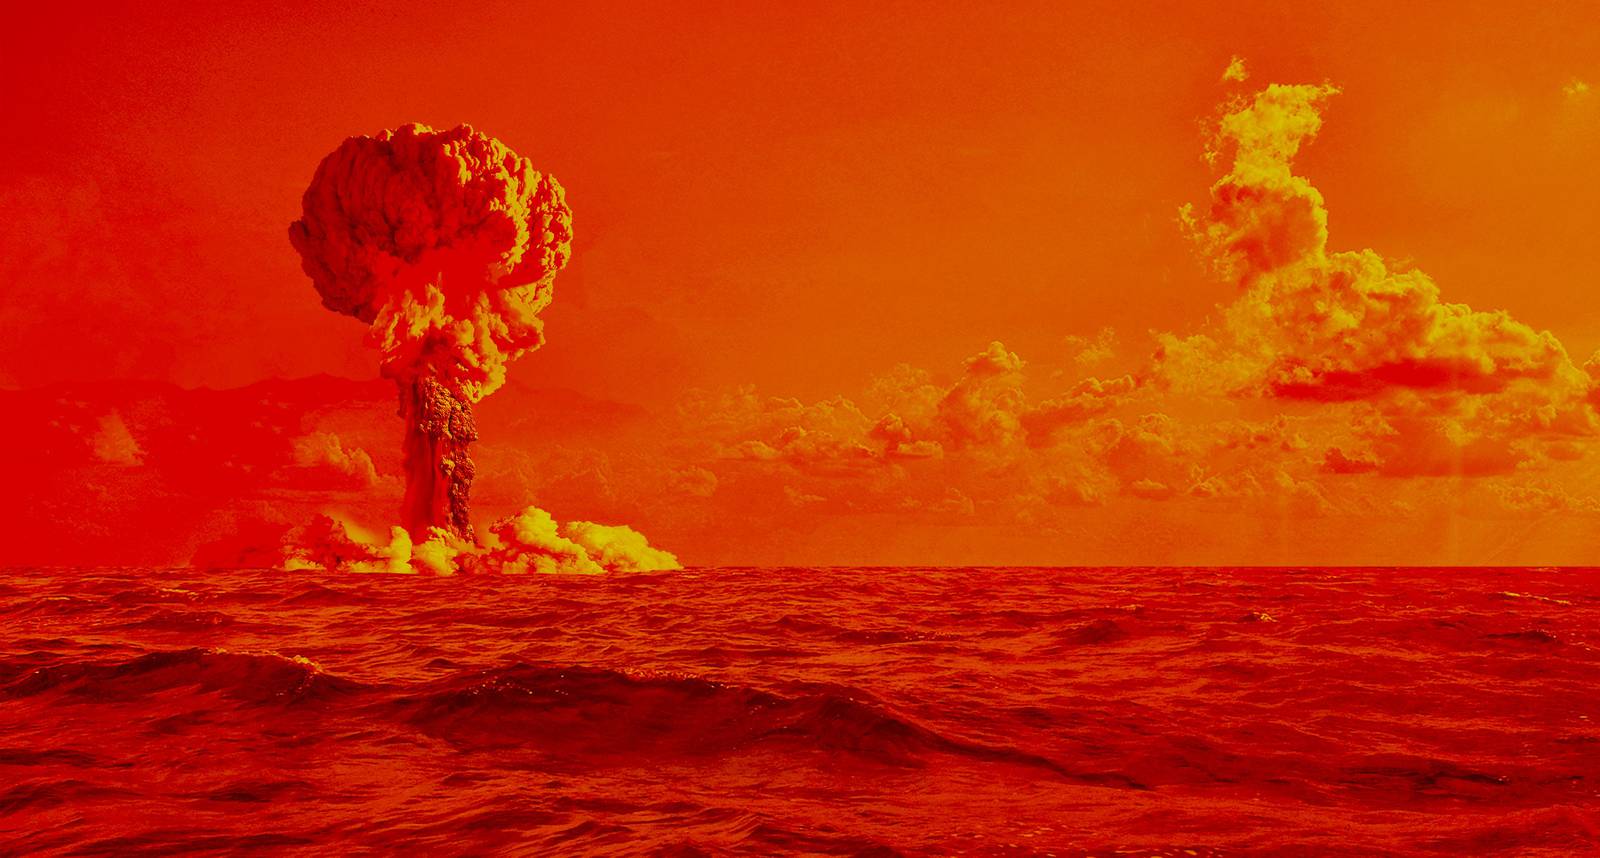 Explosion of a nuclear bomb in the ocean. Testing a weapon.